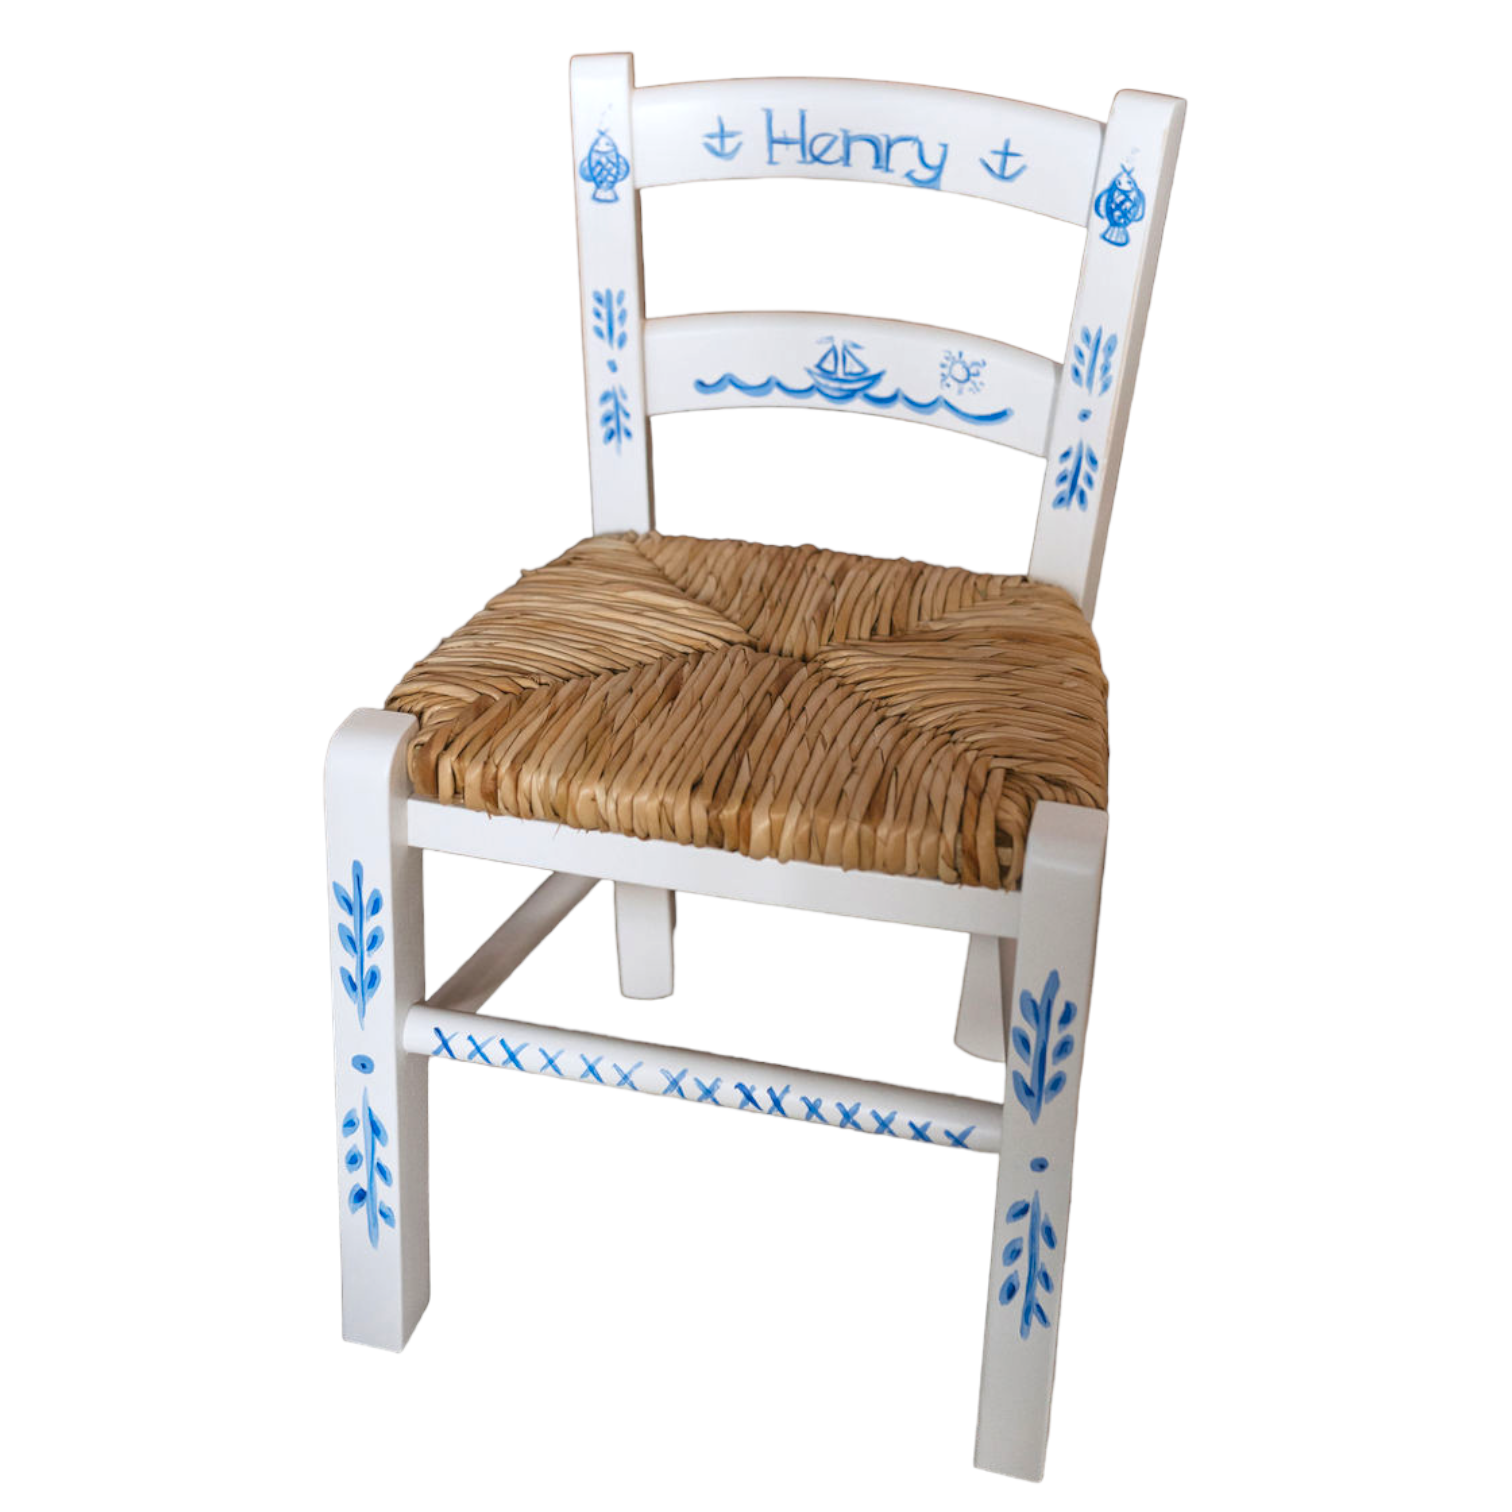 Child's Chair - Blue Boat and Fish - Premium  from Tricia Lowenfield Design 